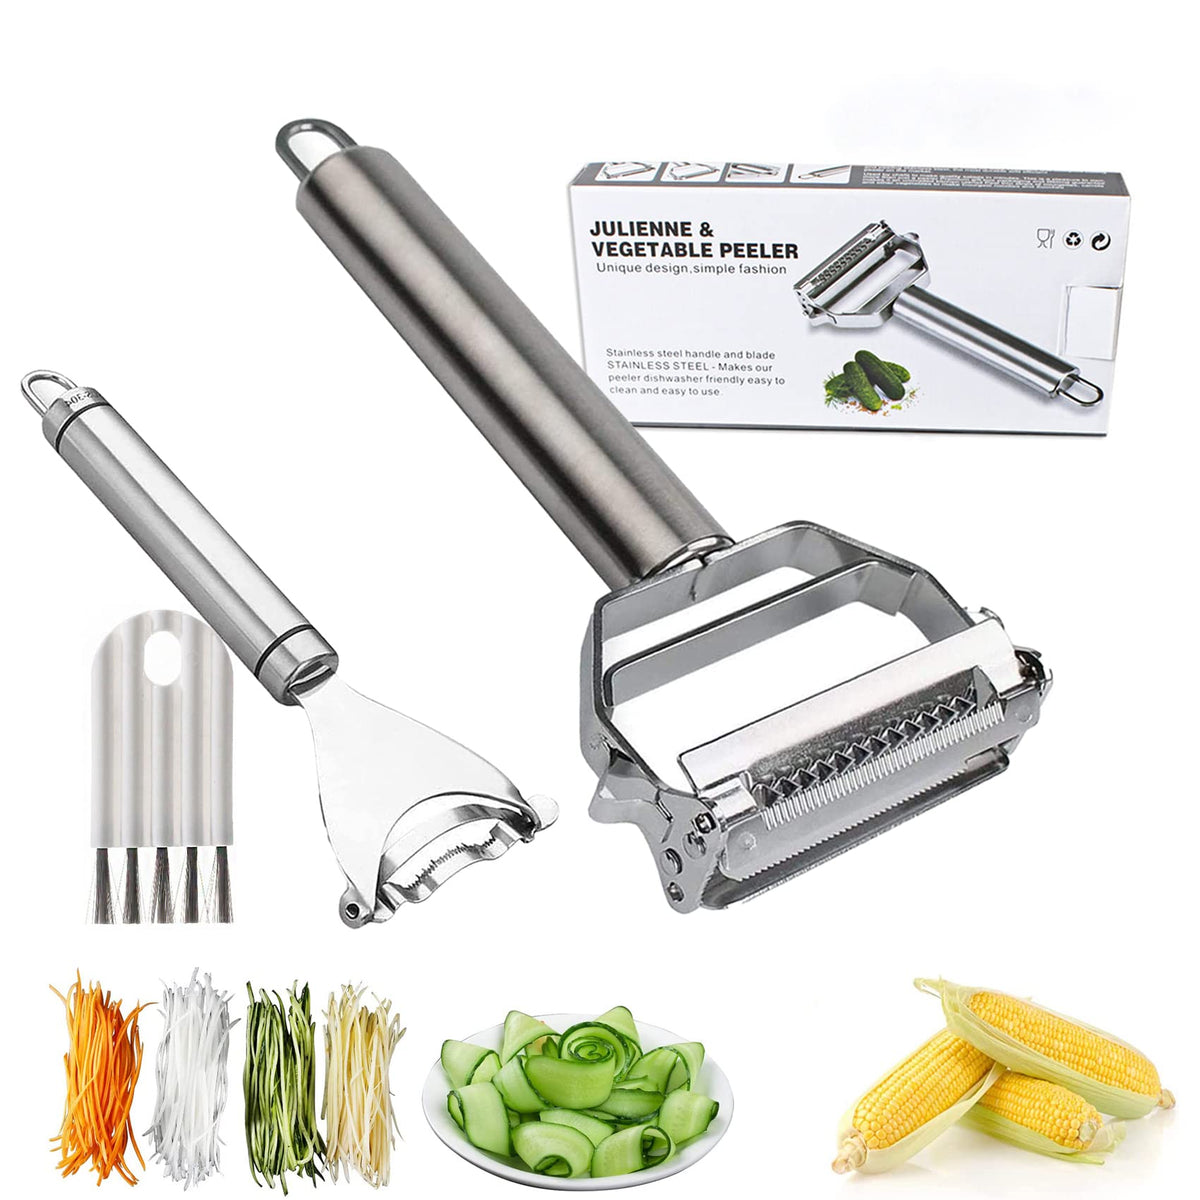 Triangle 120907 7 Y Vegetable Peeler with Julienne Stainless Steel Blade